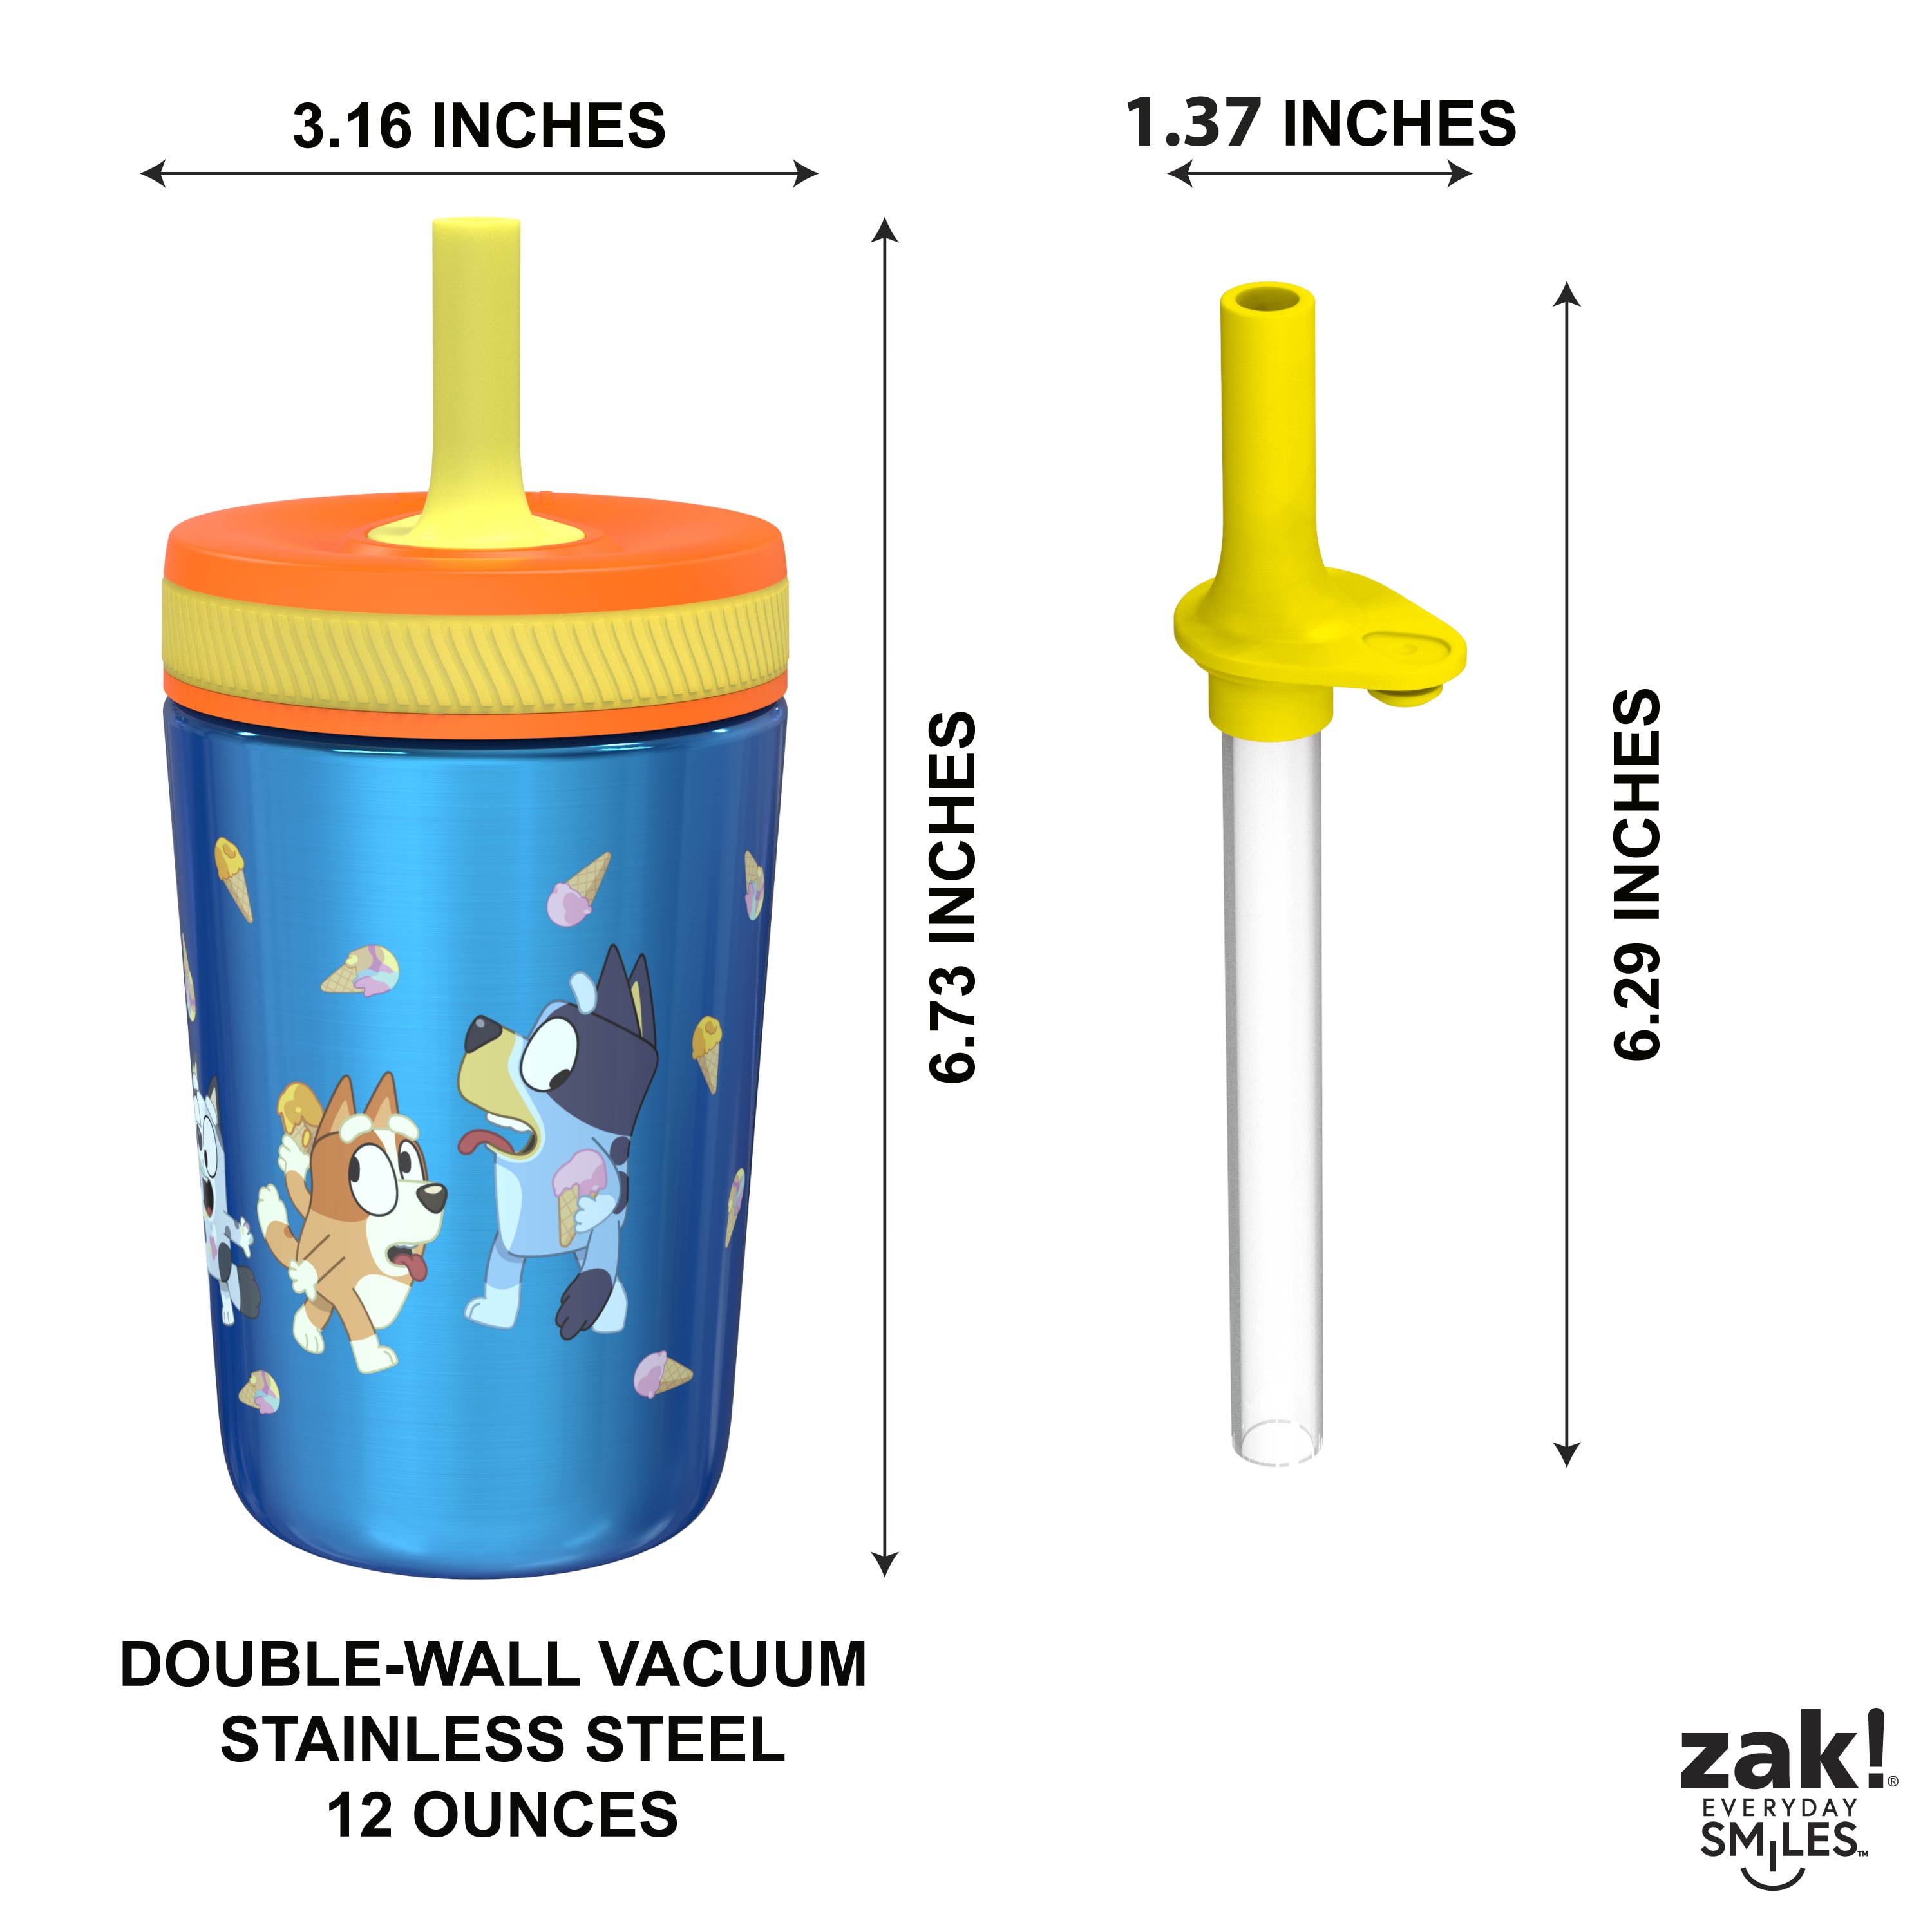 Say hello to this new 12 oz Bluey Sippy Cup and Tumbler Mix